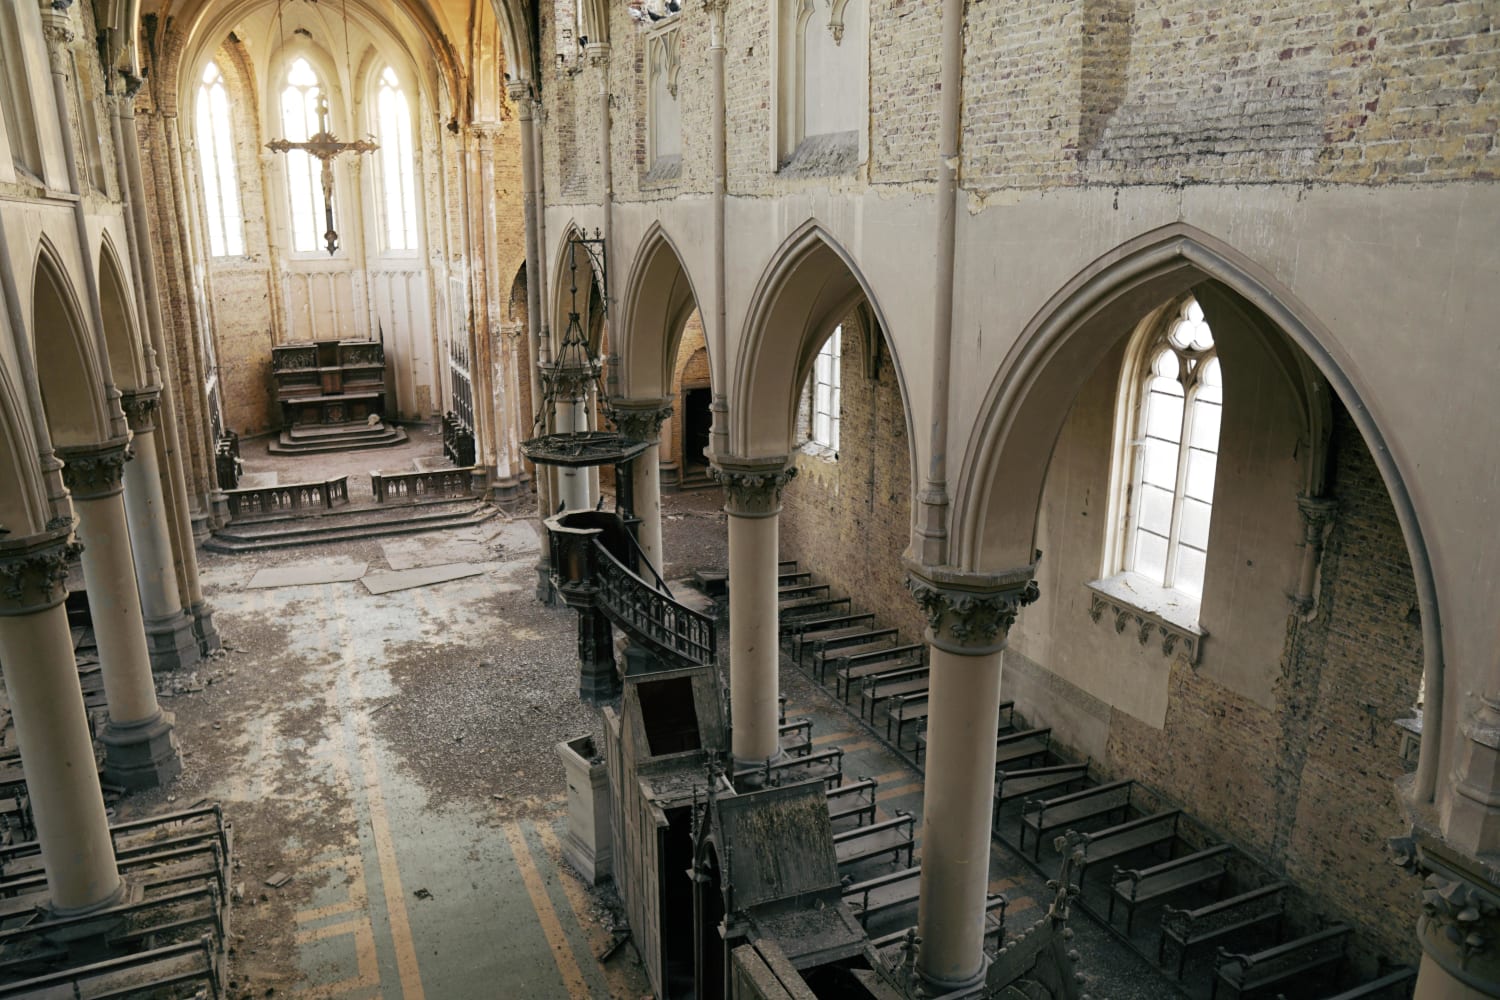 Abandoned Neo Gothic Church in Belgium (more info in the comments)